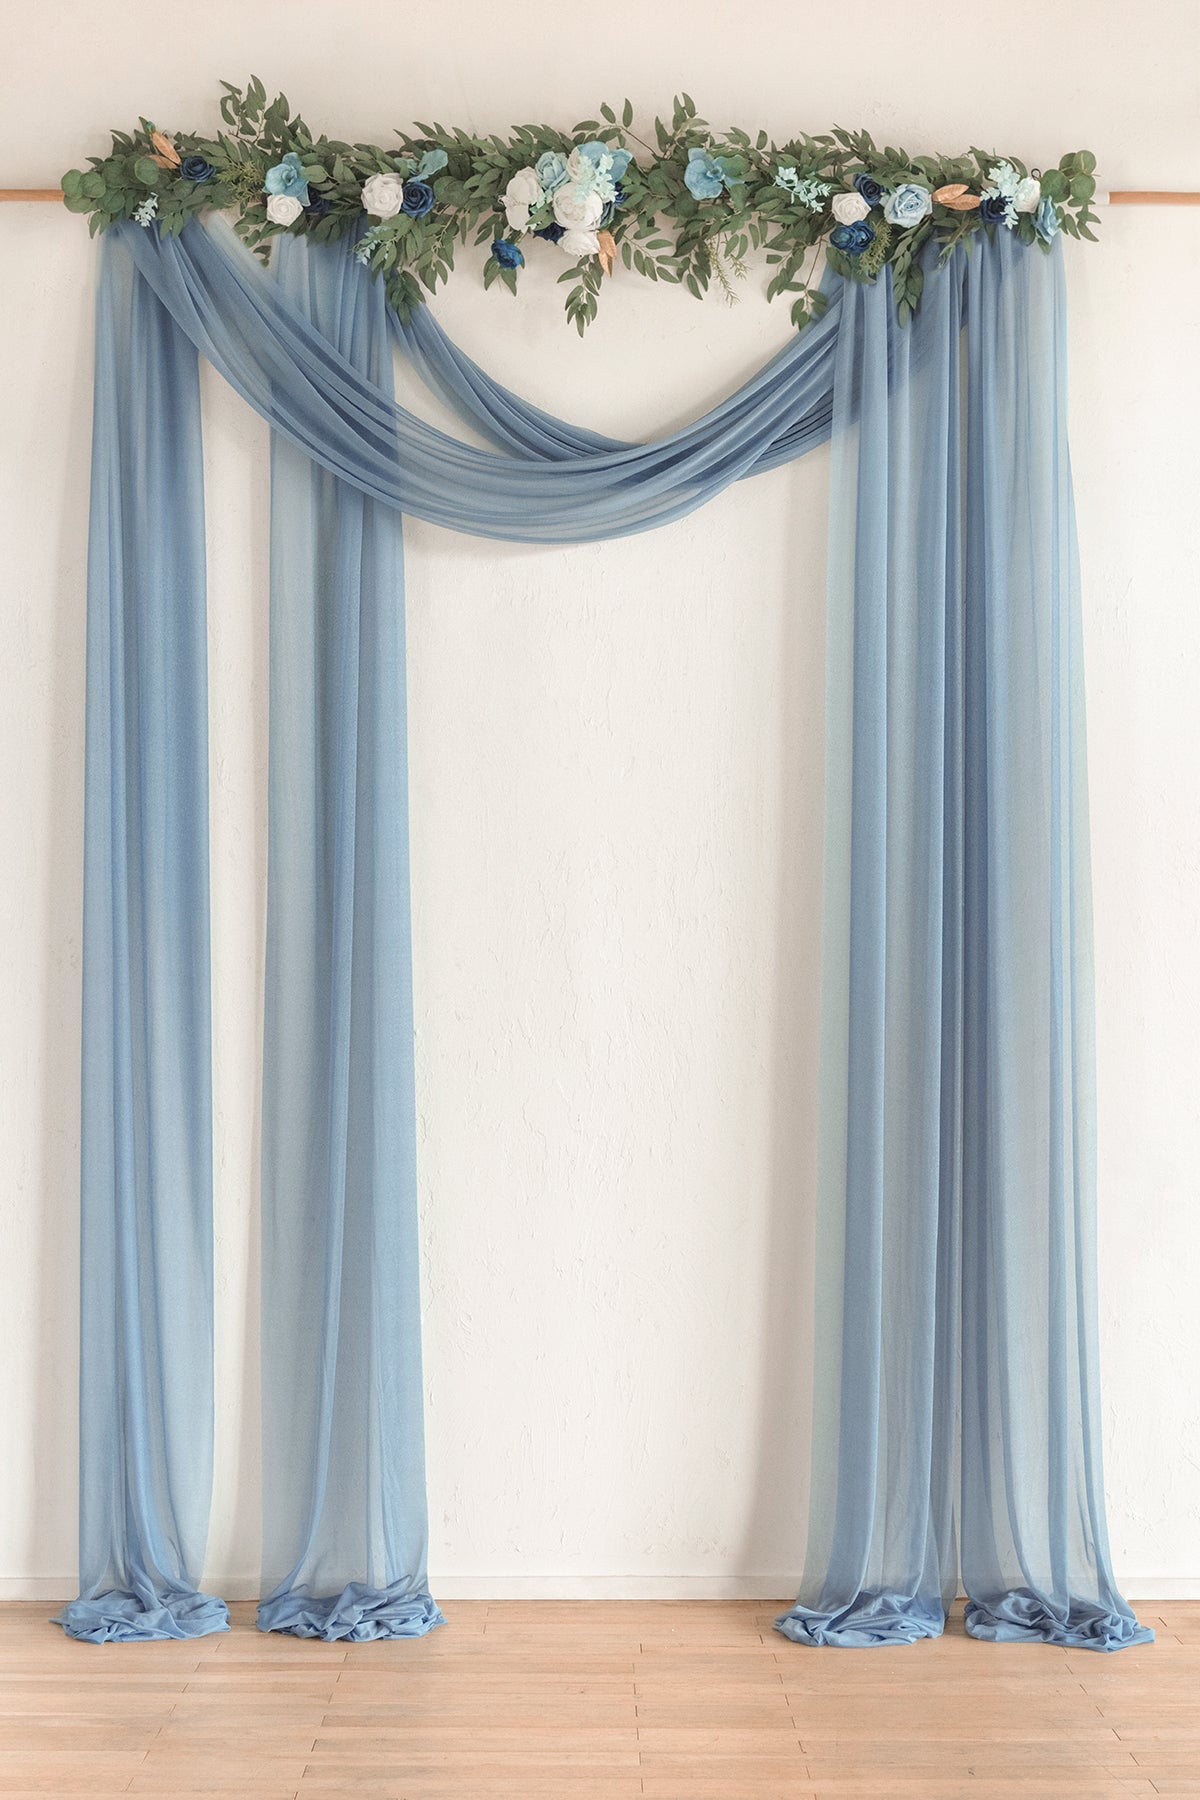 Wedding Arch Drapes in Dusty Rose & Navy